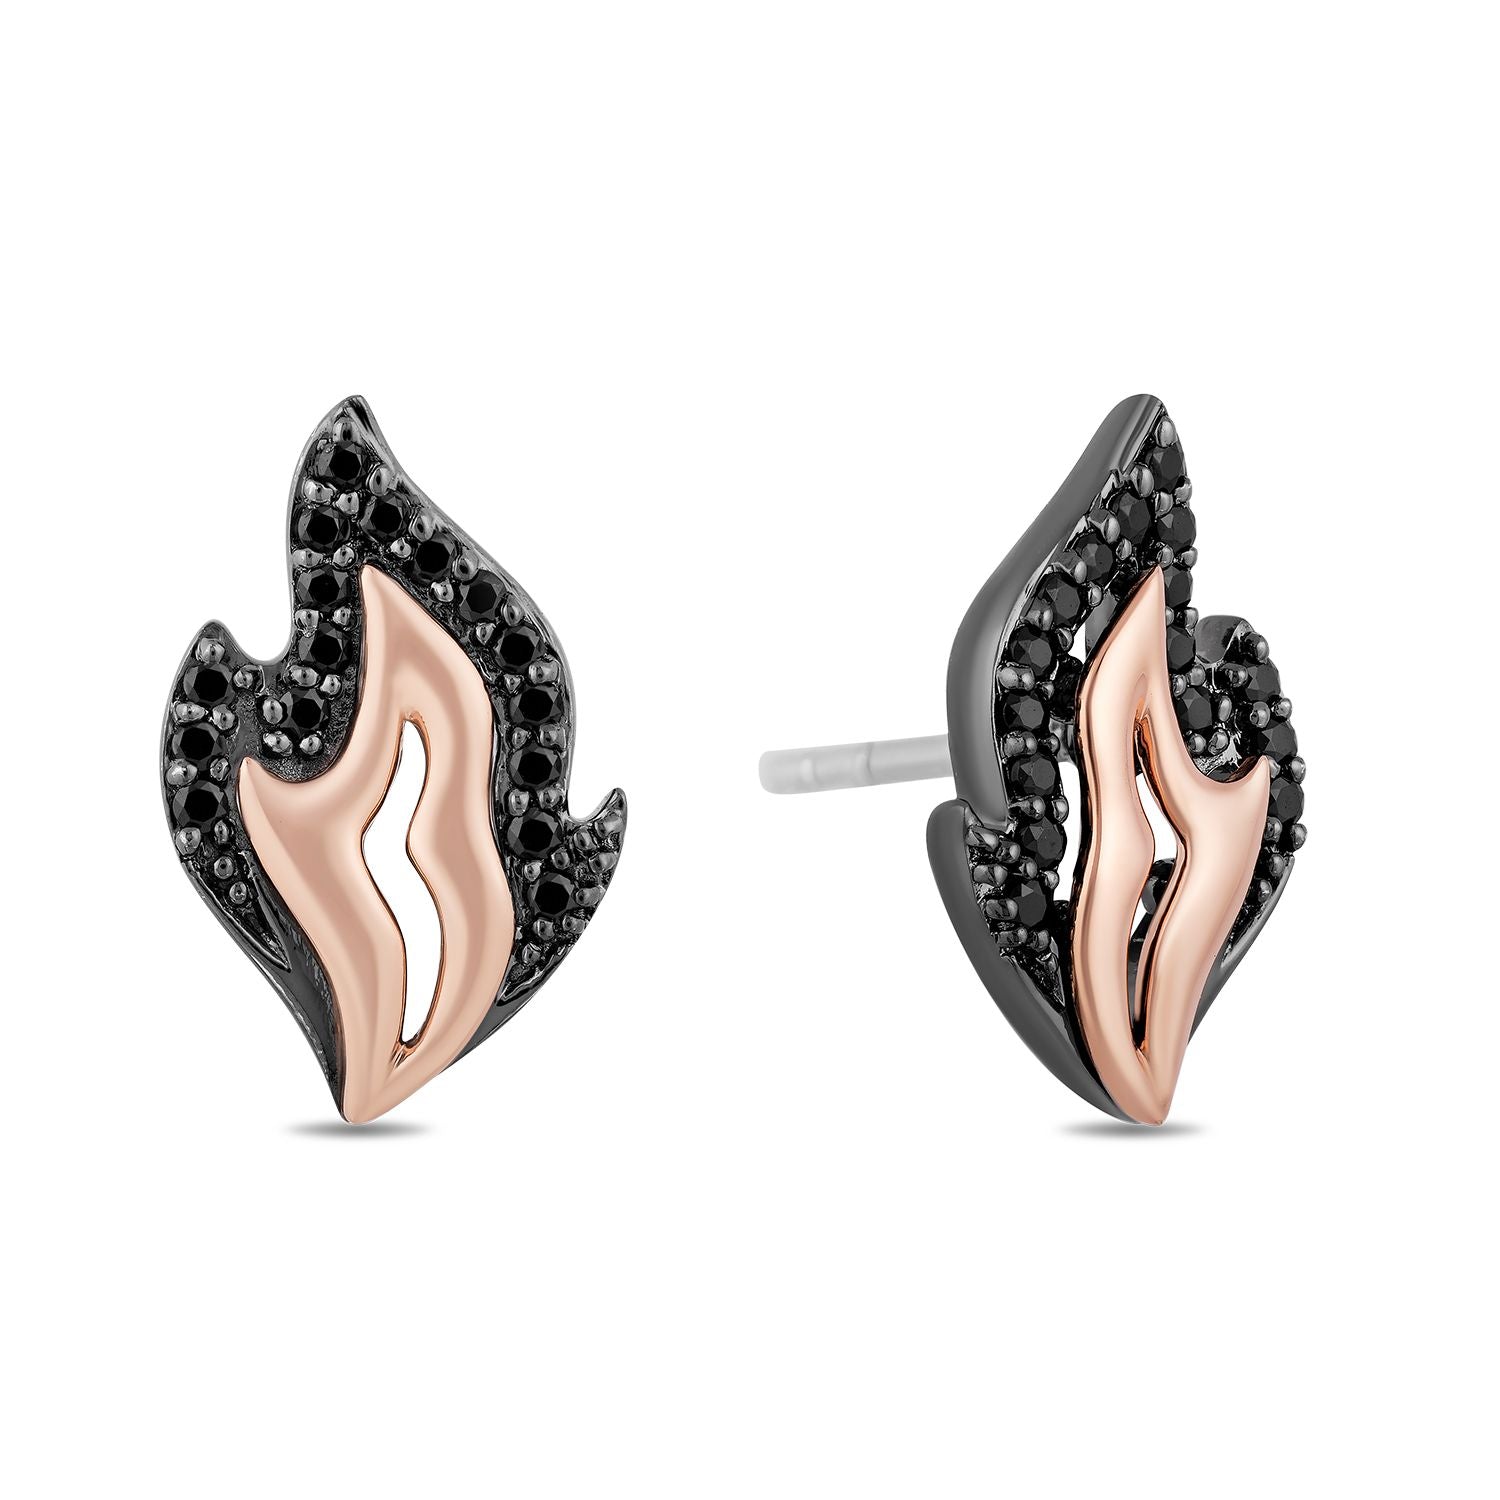 Enchanted Disney Villains Maleficent Black Diamond Pendant and Stud  Earrings Set in Sterling Silver and 10K Rose Gold